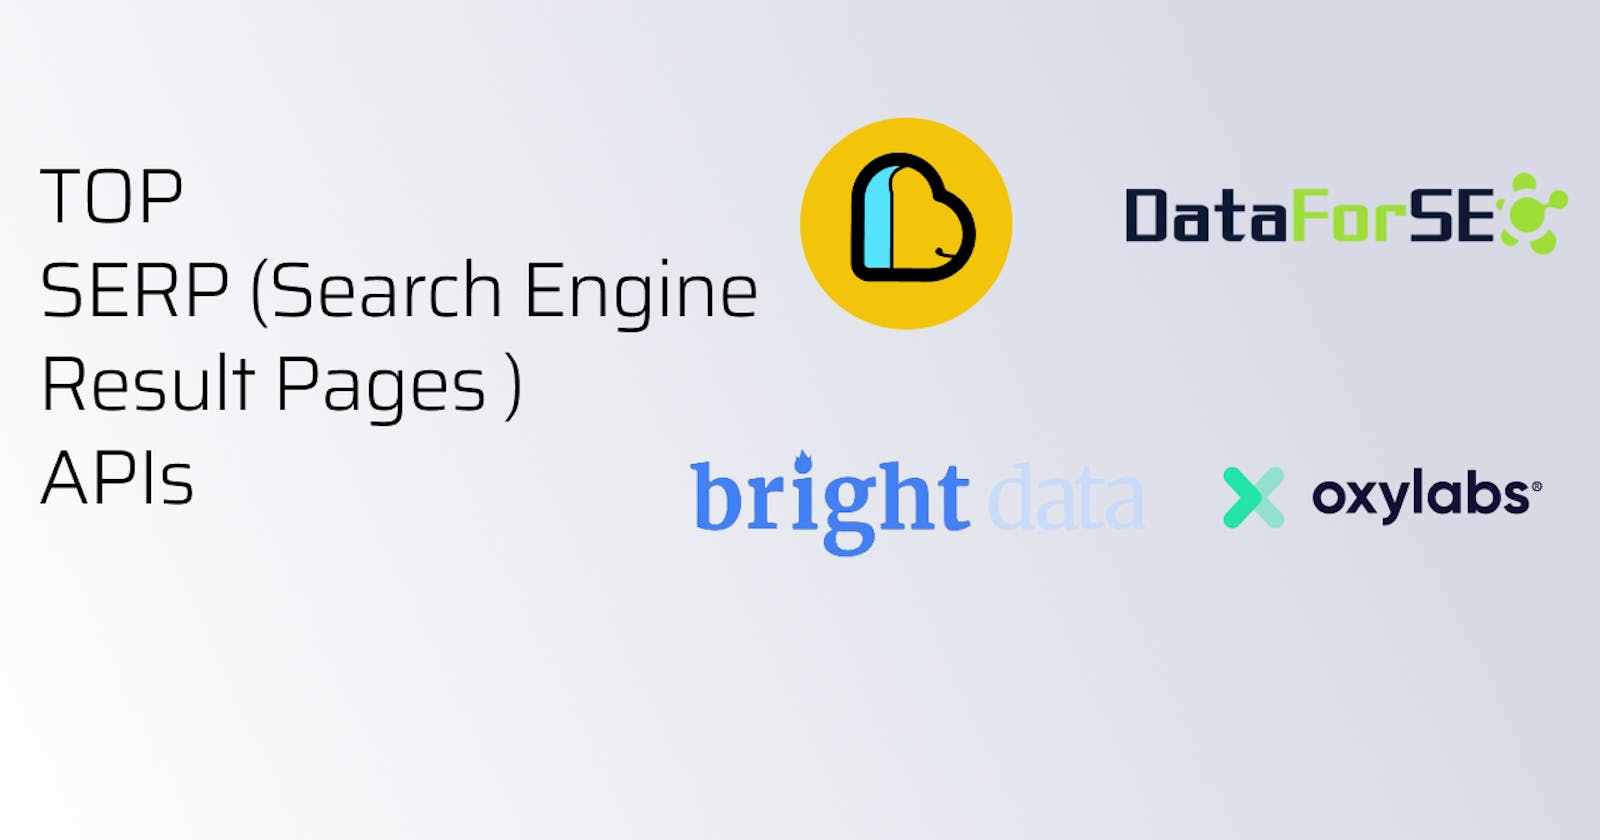 Exploring the Top SERP (Search Engine Result Pages) APIs